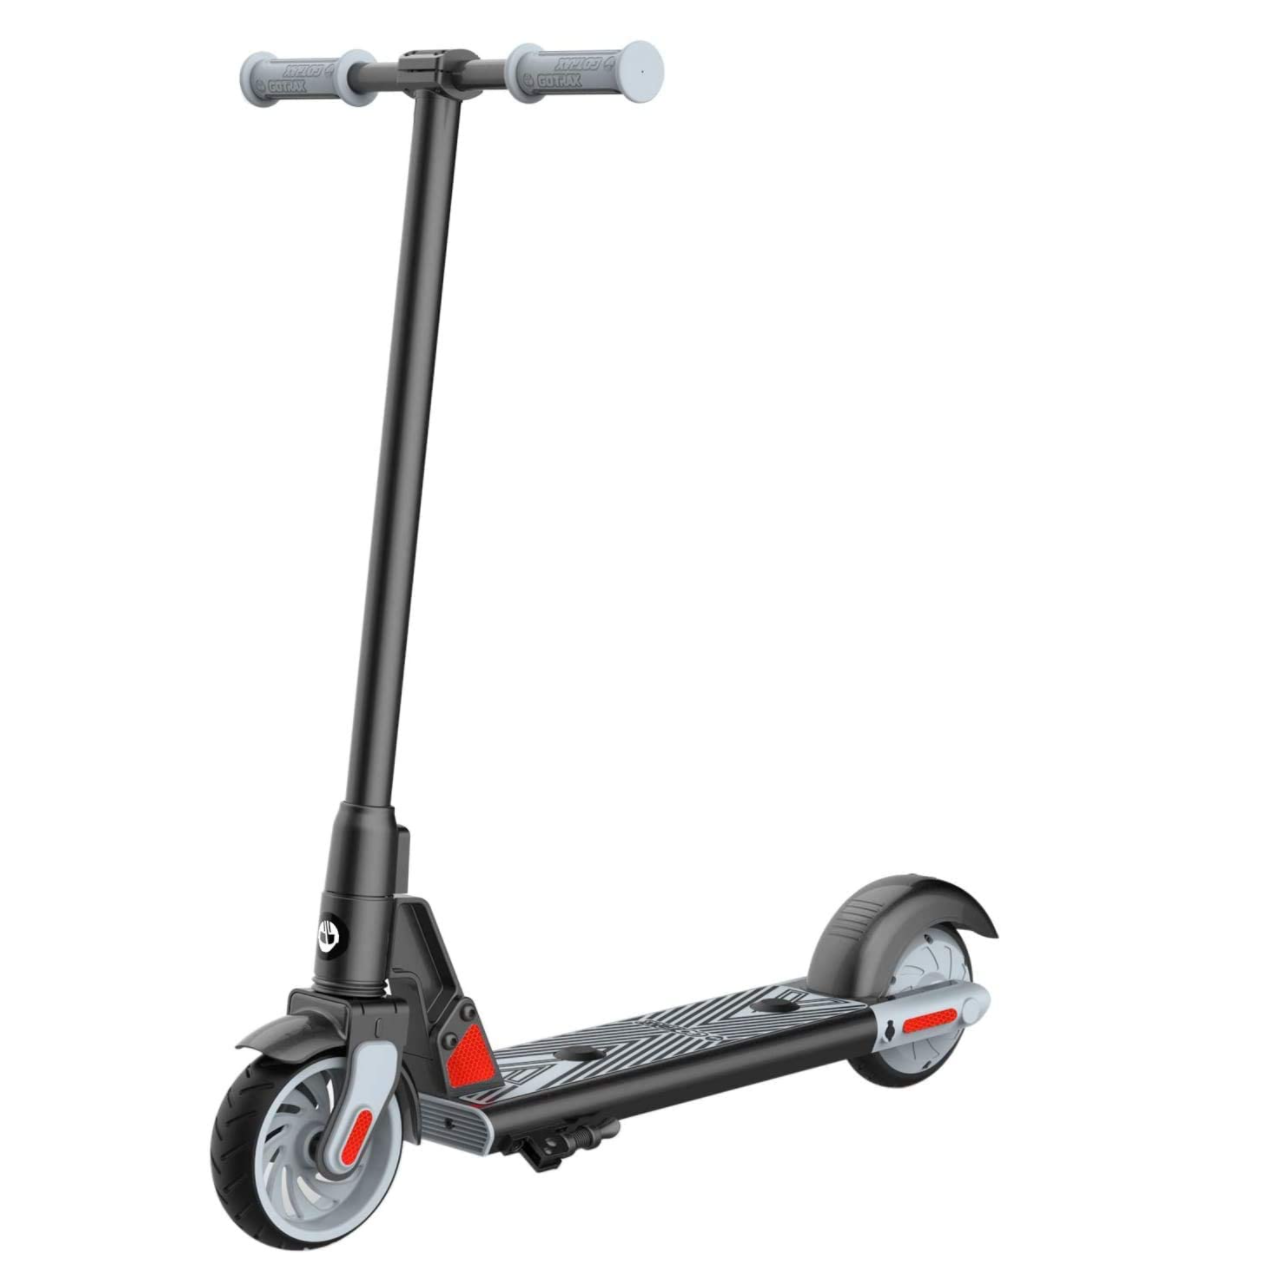 gotrax-gks-kids-electric-scooter-18999-2020-12-4